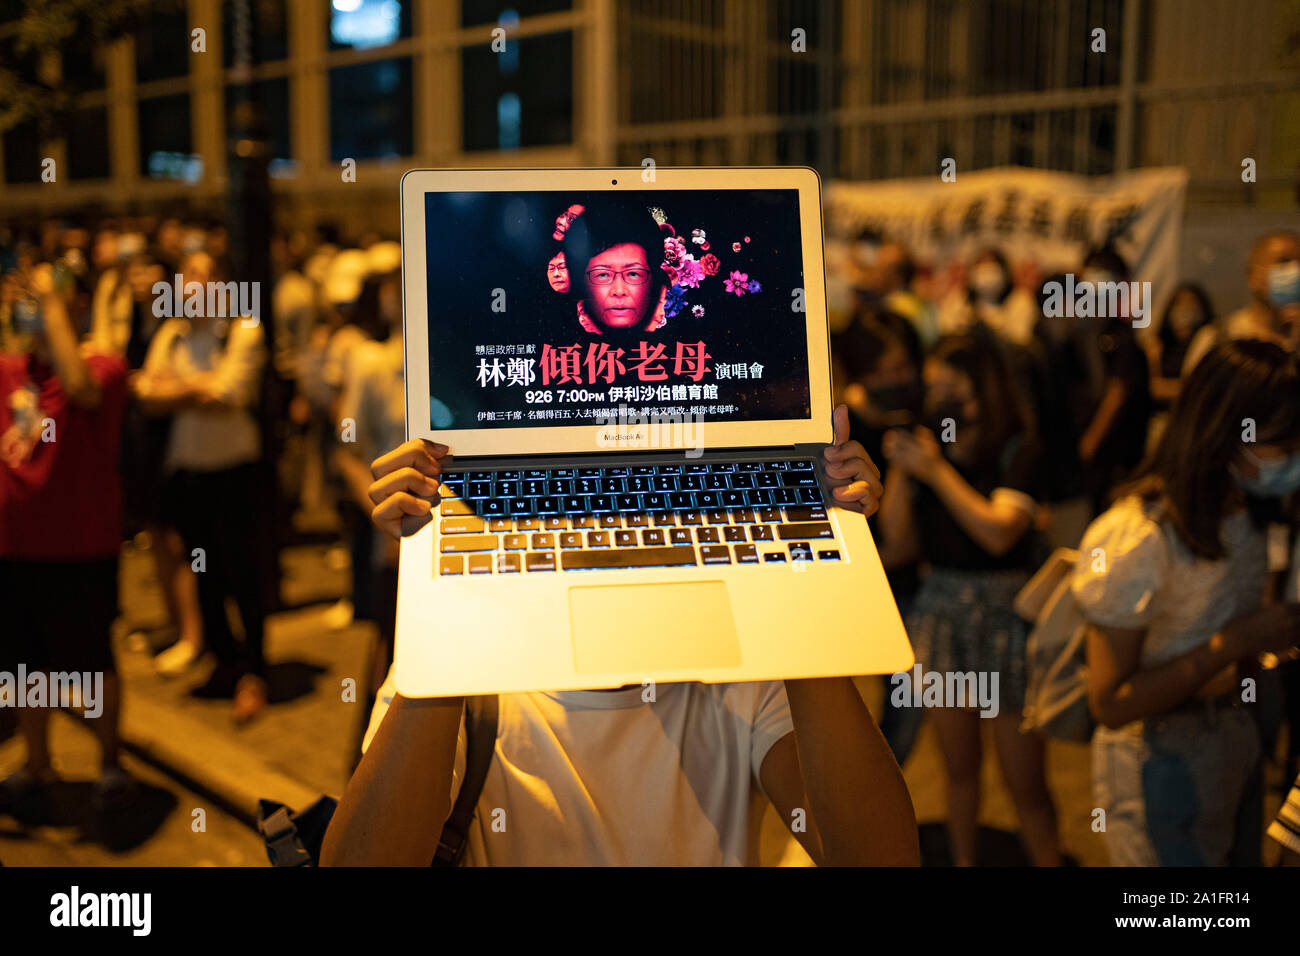 Wanchai, Hong Kong. 26 September, 2019. Demonstrators outside  the Queen Elizabeth Stadium on Thursday where Chief executive Carrie Lam was holding a dialogue with randomly selected representatives from the public to alleviate fears about the now dropped anti extradition law. Iain Masterton/Alamy Live News. Stock Photo